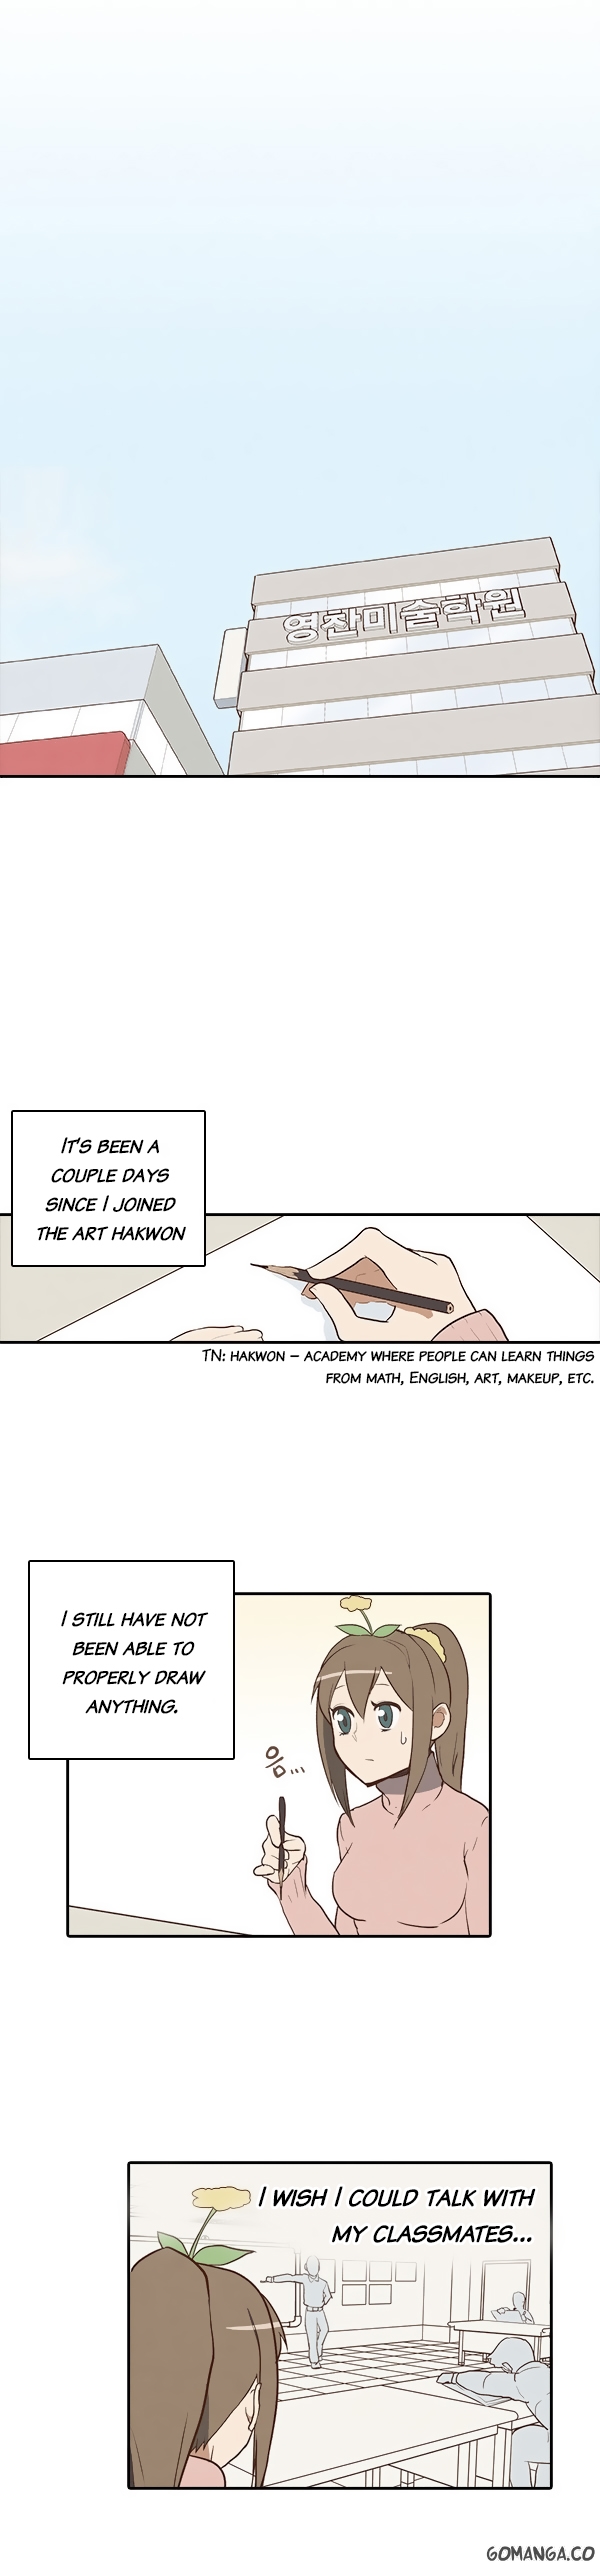 How to Open a Triangular Riceball - Chapter 5 Page 2